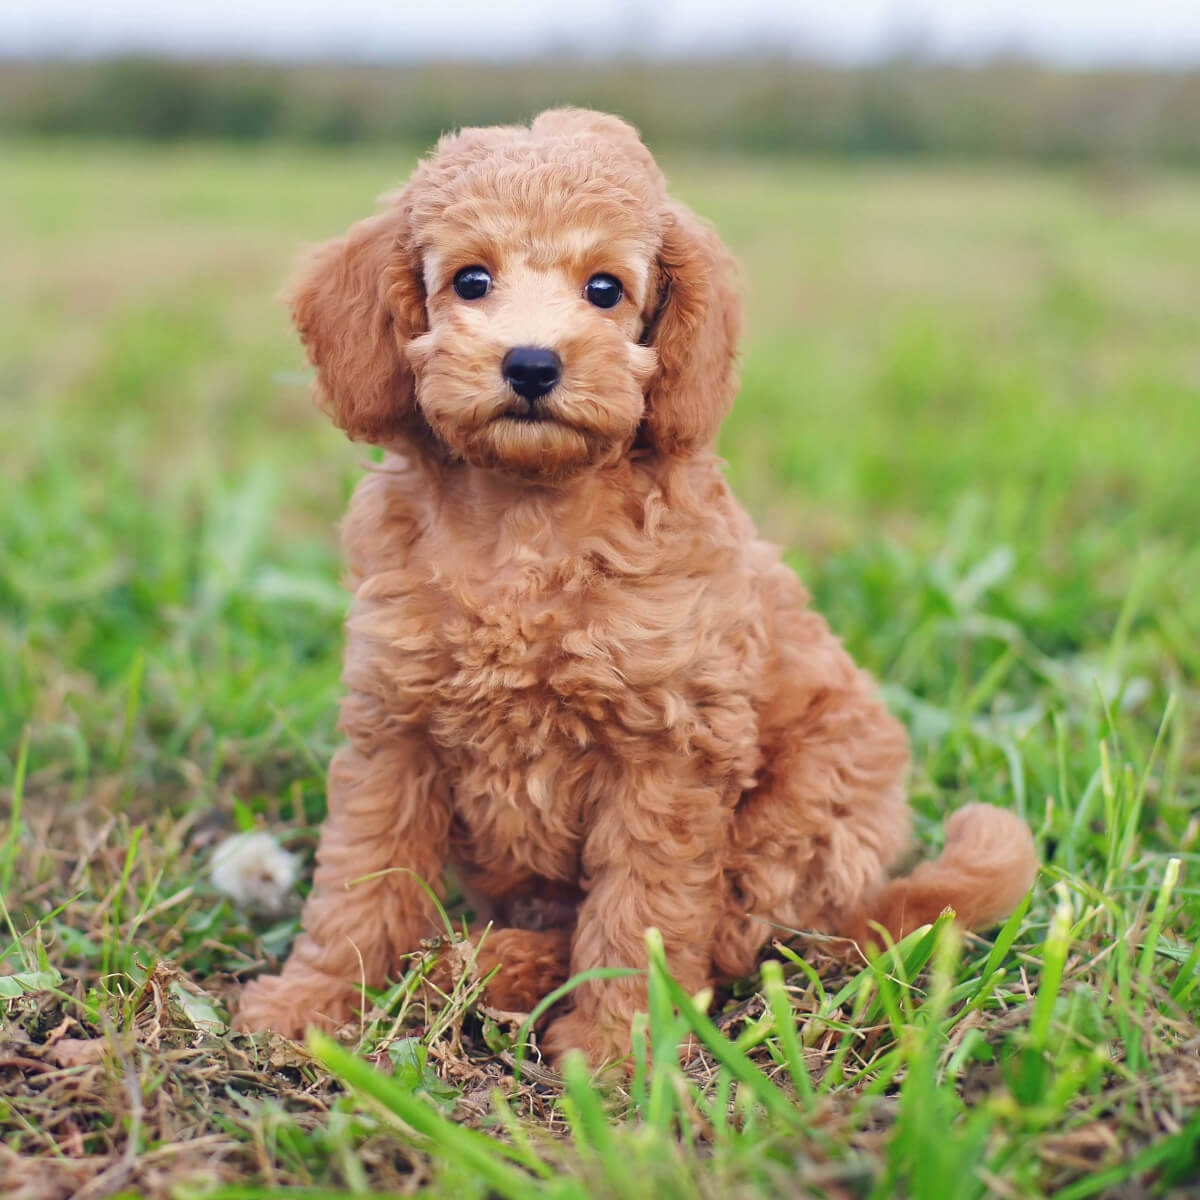 Teacup Poodle Dog Breed » Everything About Teacup Poodles 